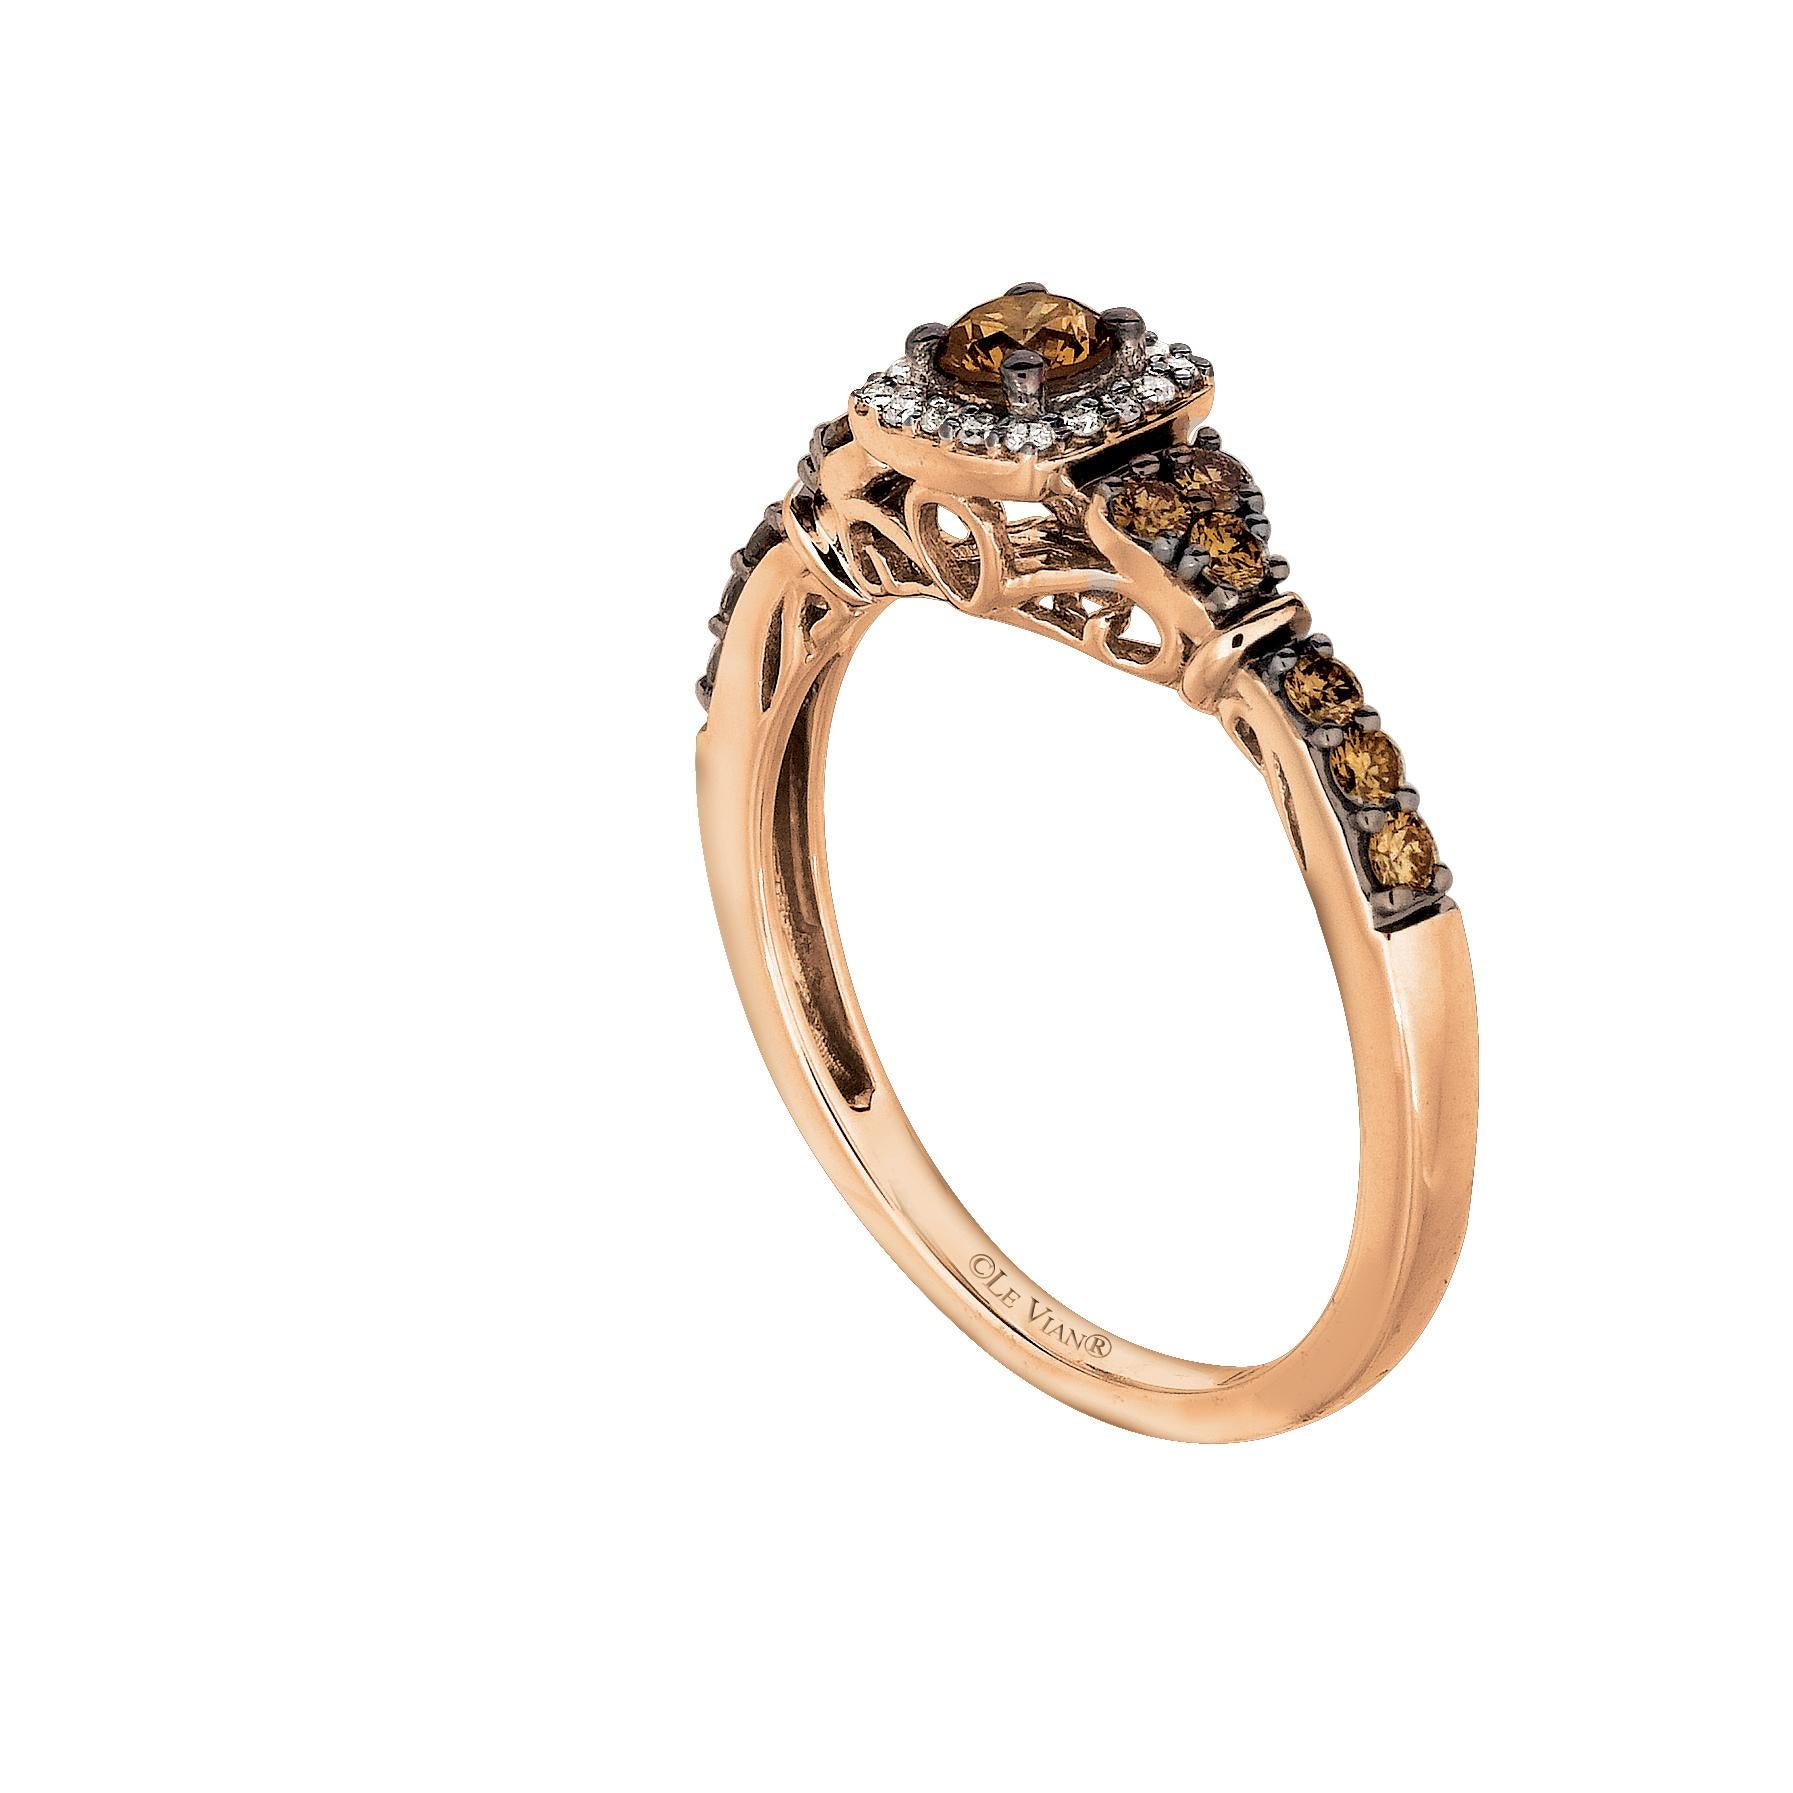 LeVian 14K Rose Gold White/Chocolate Diamond Halo Fashion Ring In New Condition For Sale In Great Neck, NY